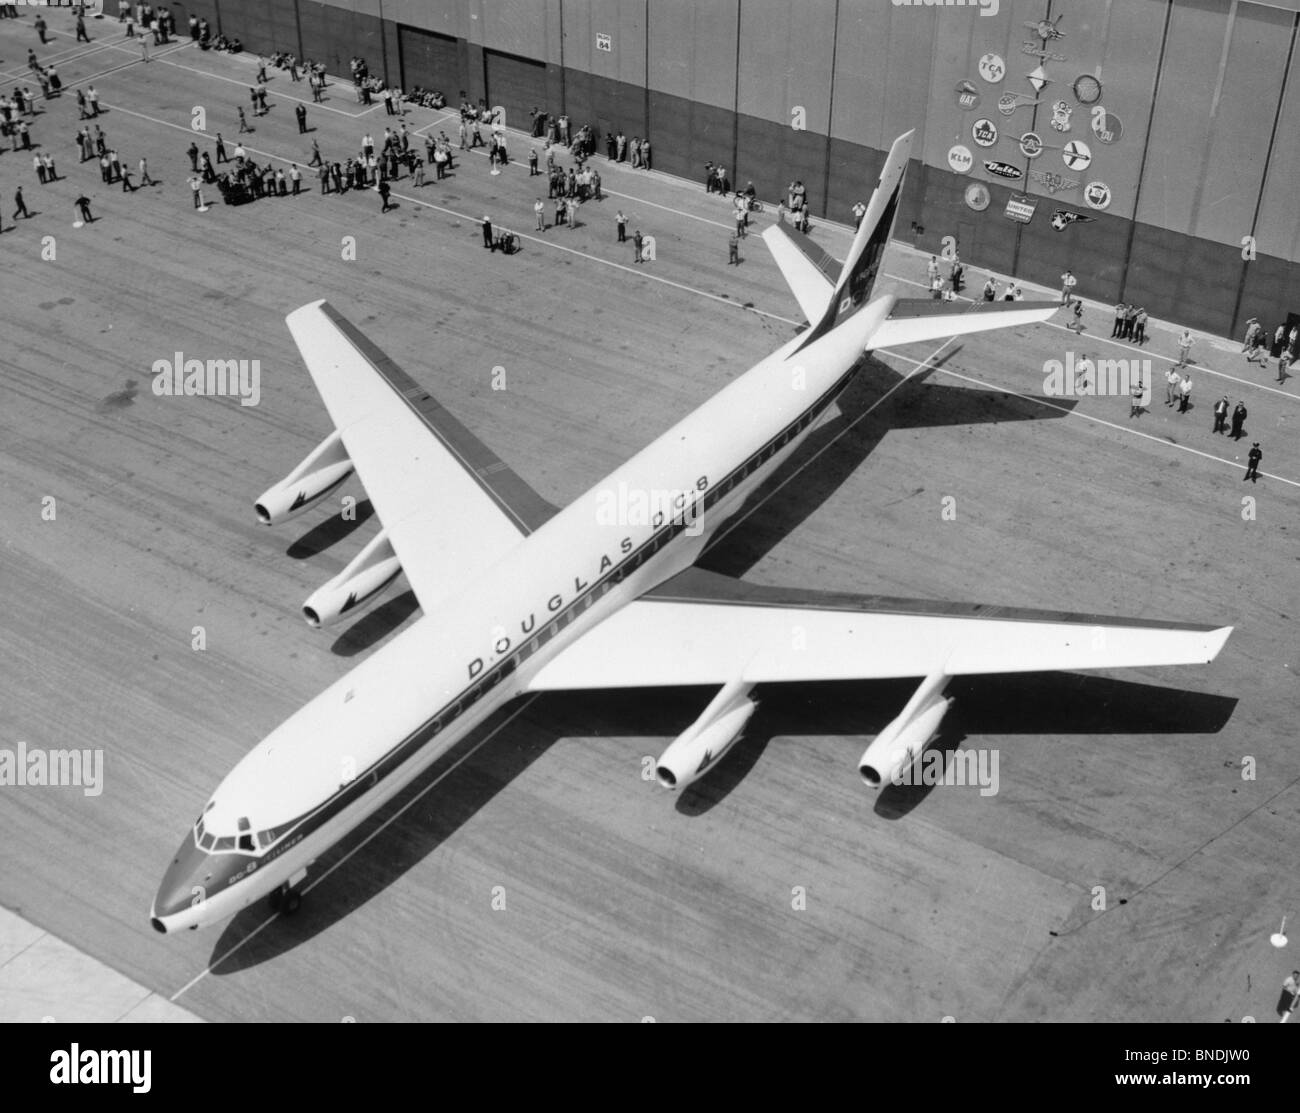 Aerial view of Douglas DC-8 airplane at airport Stock Photo